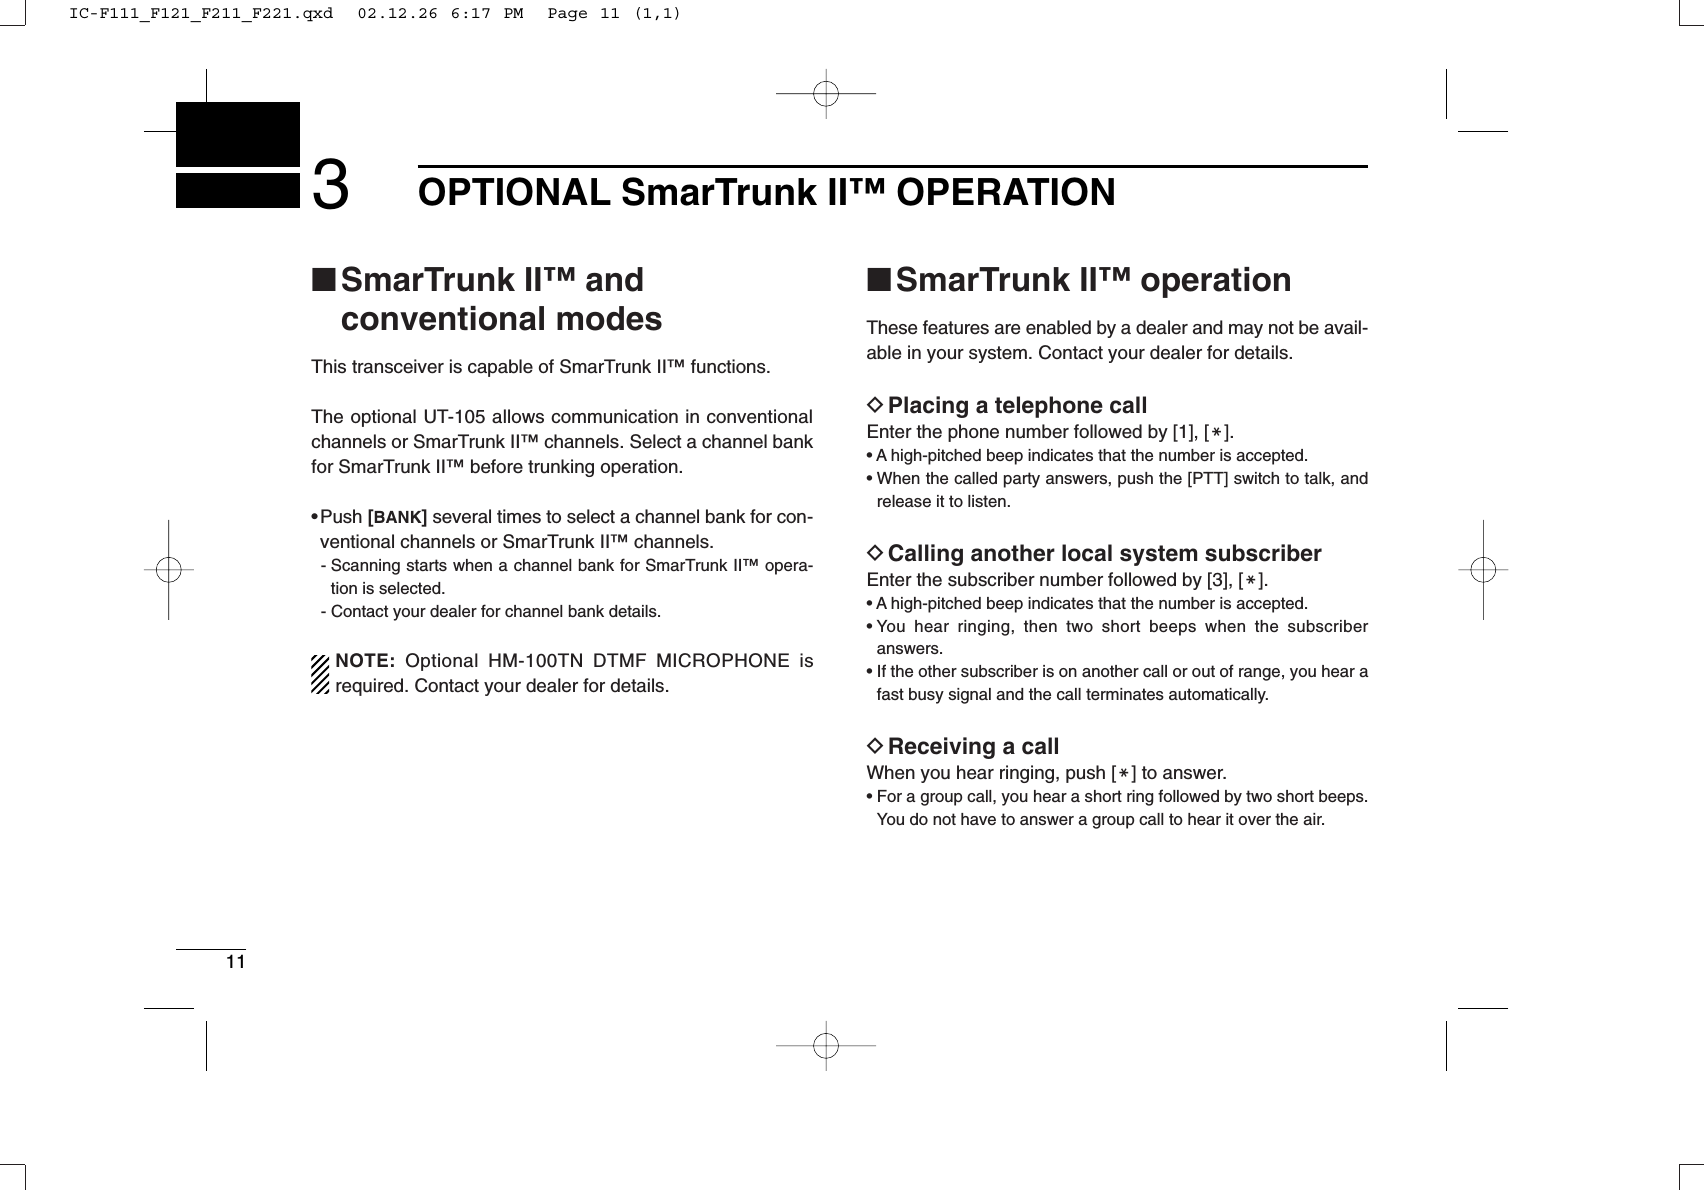 113OPTIONAL SmarTrunk II™OPERATION■SmarTrunk II™and conventional modesThis transceiver is capable of SmarTrunk II™ functions.The optional UT-105 allows communication in conventionalchannels or SmarTrunk II™ channels. Select a channel bankfor SmarTrunk II™ before trunking operation.• Push [BANK]several times to select a channel bank for con-ventional channels or SmarTrunk II™ channels.- Scanning starts when a channel bank for SmarTrunk II™ opera-tion is selected.- Contact your dealer for channel bank details.NOTE: Optional HM-100TN DTMF MICROPHONE isrequired. Contact your dealer for details.■SmarTrunk II™operationThese features are enabled by a dealer and may not be avail-able in your system. Contact your dealer for details.DPlacing a telephone callEnter the phone number followed by [1], [M].• A high-pitched beep indicates that the number is accepted.• When the called party answers, push the [PTT] switch to talk, andrelease it to listen.DCalling another local system subscriberEnter the subscriber number followed by [3], [M].• A high-pitched beep indicates that the number is accepted.• You hear ringing, then two short beeps when the subscriberanswers.• If the other subscriber is on another call or out of range, you hear afast busy signal and the call terminates automatically.DReceiving a callWhen you hear ringing, push [M] to answer.• For a group call, you hear a short ring followed by two short beeps.You do not have to answer a group call to hear it over the air.IC-F111_F121_F211_F221.qxd  02.12.26 6:17 PM  Page 11 (1,1)